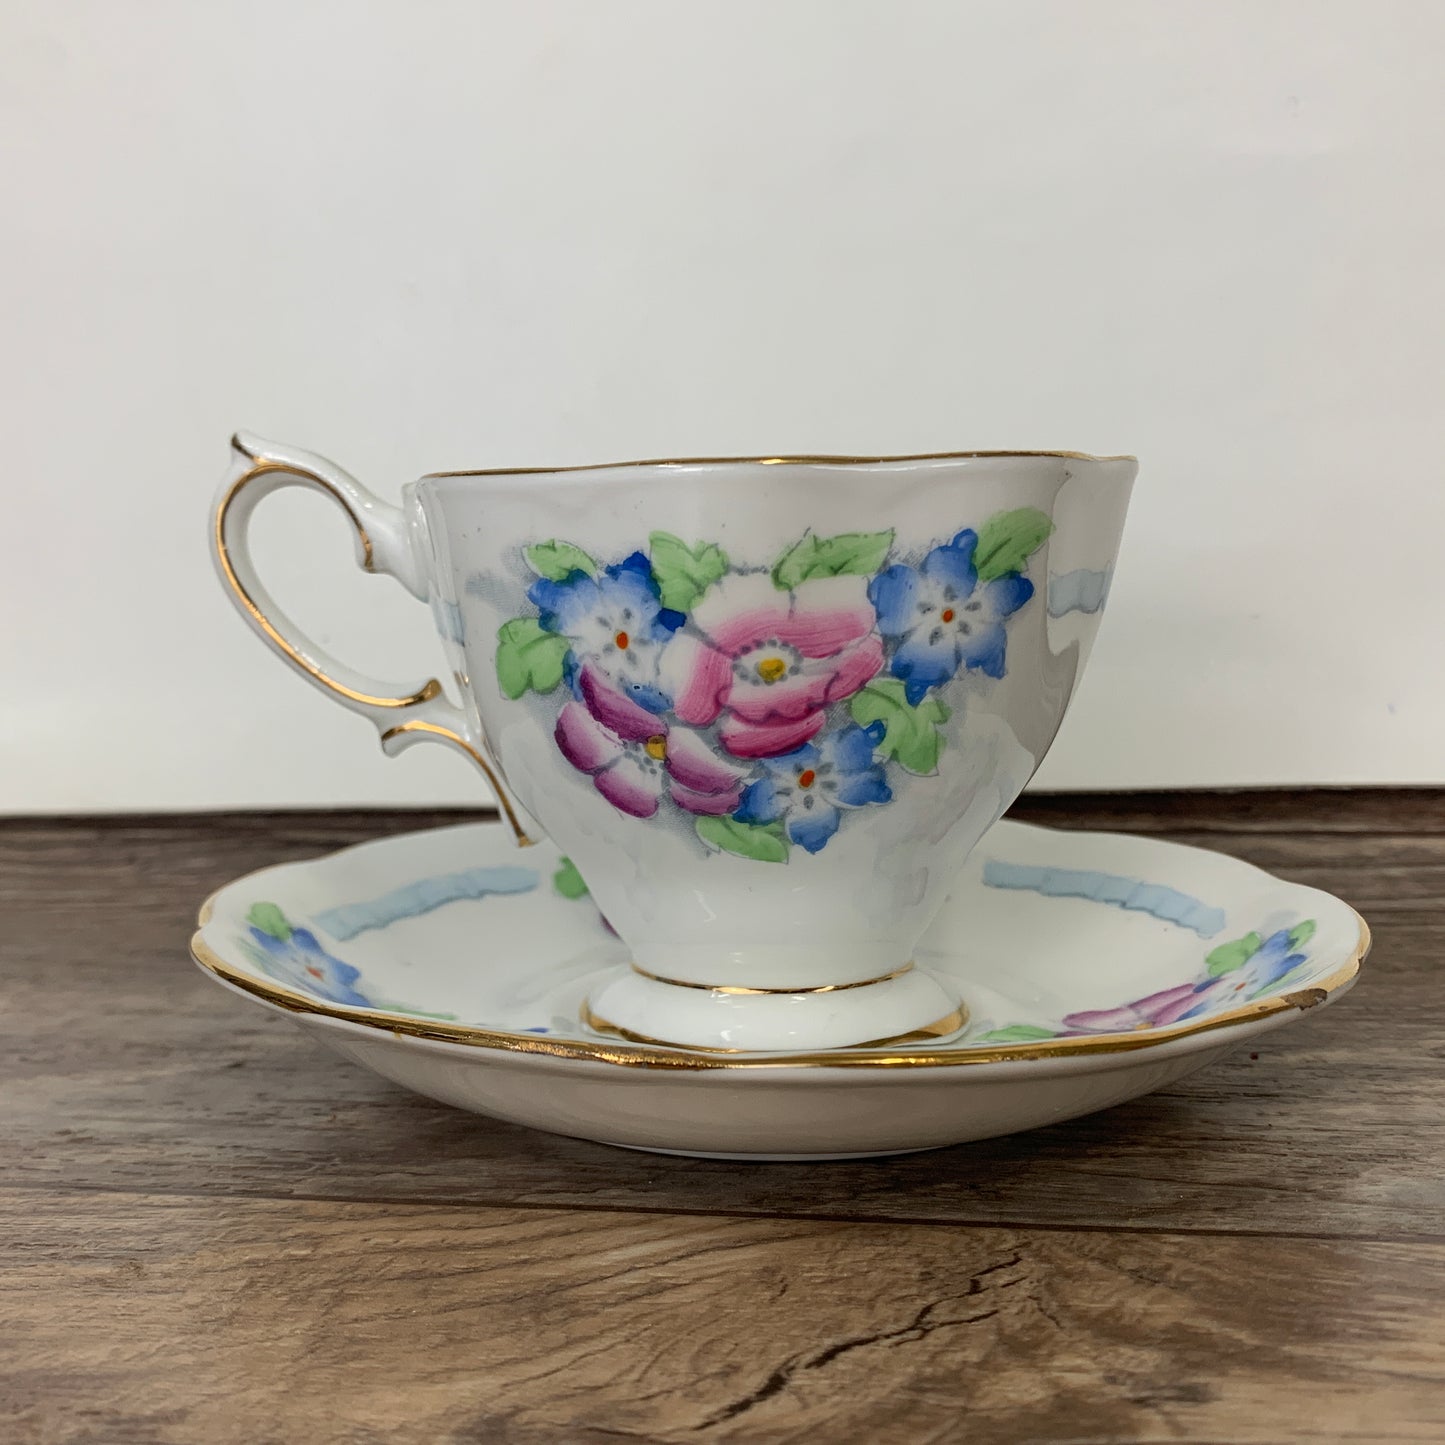 Antique Royal Albert Hand Painted Teacup and Saucer Set